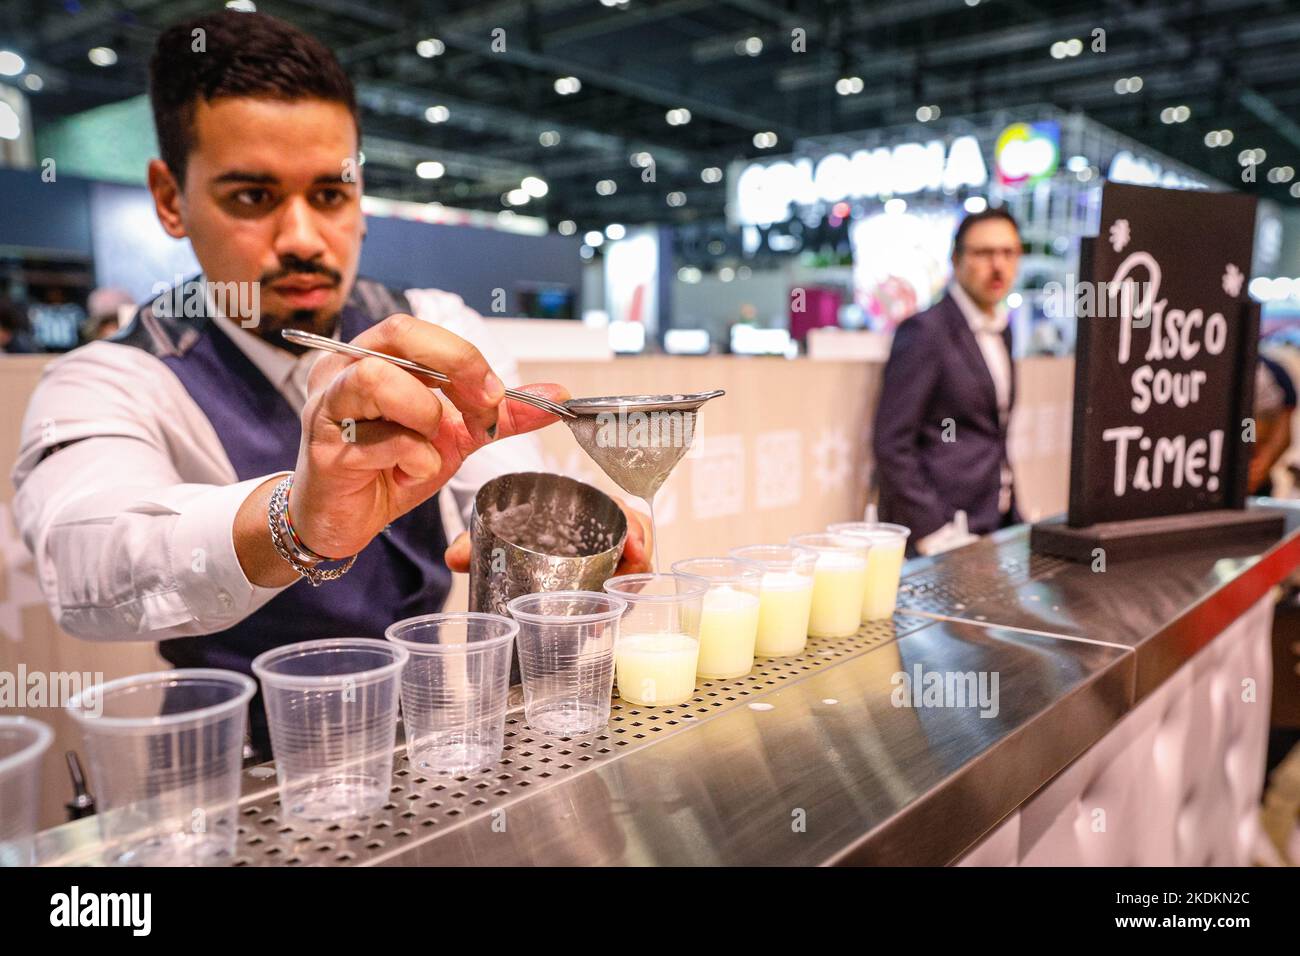 London, UK. 07th Nov, 2022. Two very capable bar tenders mix Pisco Sours, the Peruvian cocktails, for visitors to the stand. World Travel Market (WTM), London's annual travel and tourism expo, once again opens its doors at the ExCel exhibition centre in East London. The event is in its 43rd edition this year and appears to much busier this year with attendance up strongly on last year. Credit: Imageplotter/Alamy Live News Stock Photo